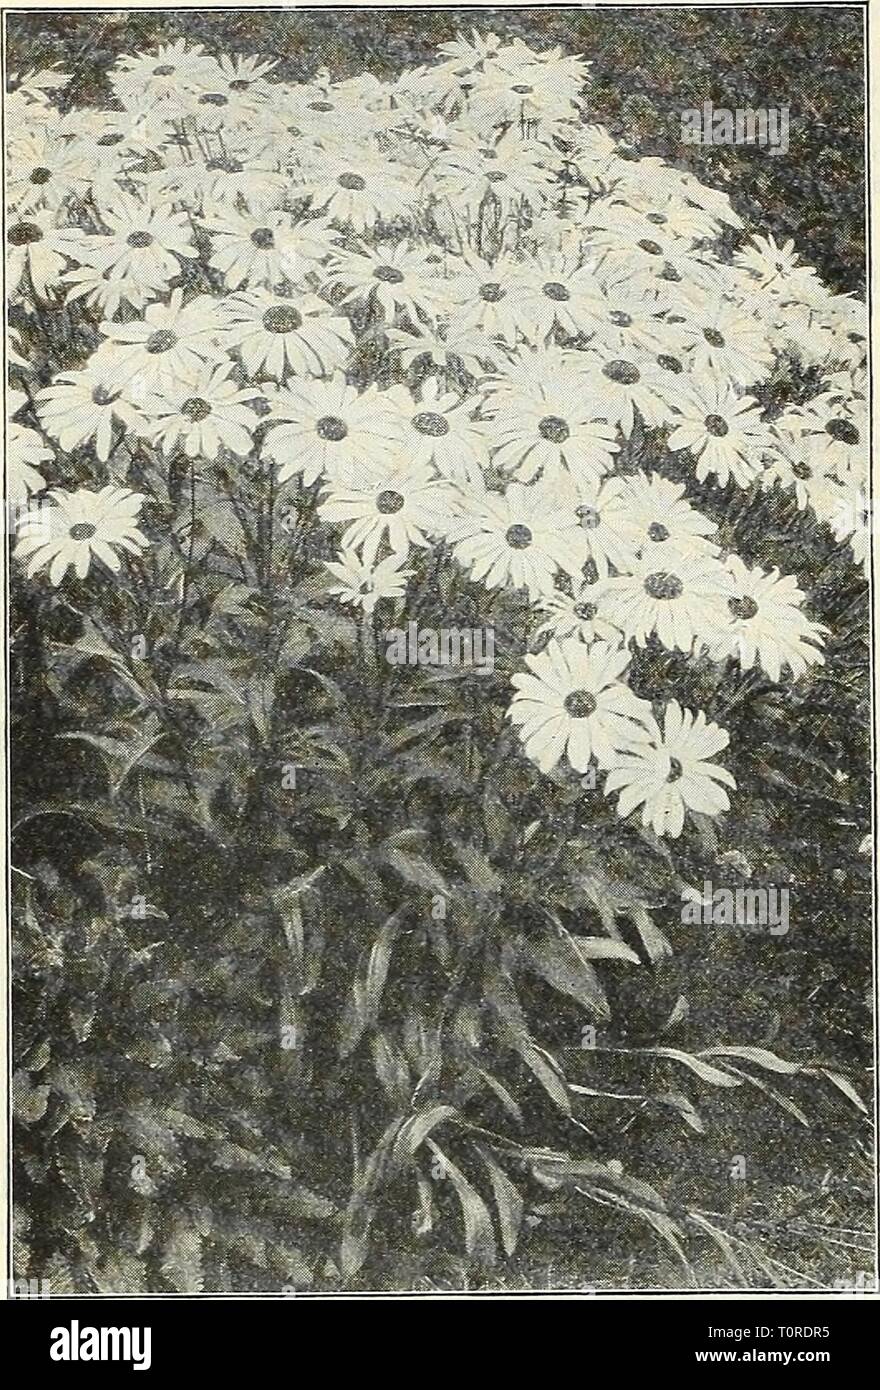 Dreer's autumn catalogue 1929 (1929) Dreer's autumn catalogue 1929  dreersautumncata1929henr Year: 1929  80 /flEHFyABREE^ RELIABLE FLOWER SEEDS. I    Shasta Daisy AljVSK.^ Cerastium (Snow in Suinmer) p^R pkt. 1911 Tomentosum. A very pretty dwarf, white-leaved edging plant, bearing small white flowers; hardy perennial SO IS Cheiranthus A'ery pretty dwarf hardy biennial plants, for early spring flowerin, sow in late suromer. Splendid for rockery. 1915 Allionii (Siberian Wallflower). About 12 inches high with heads of brilliant orange flowers. J oz., 40 cts : 1916 Linifolium (Alpine Wallflower).  Stock Photo